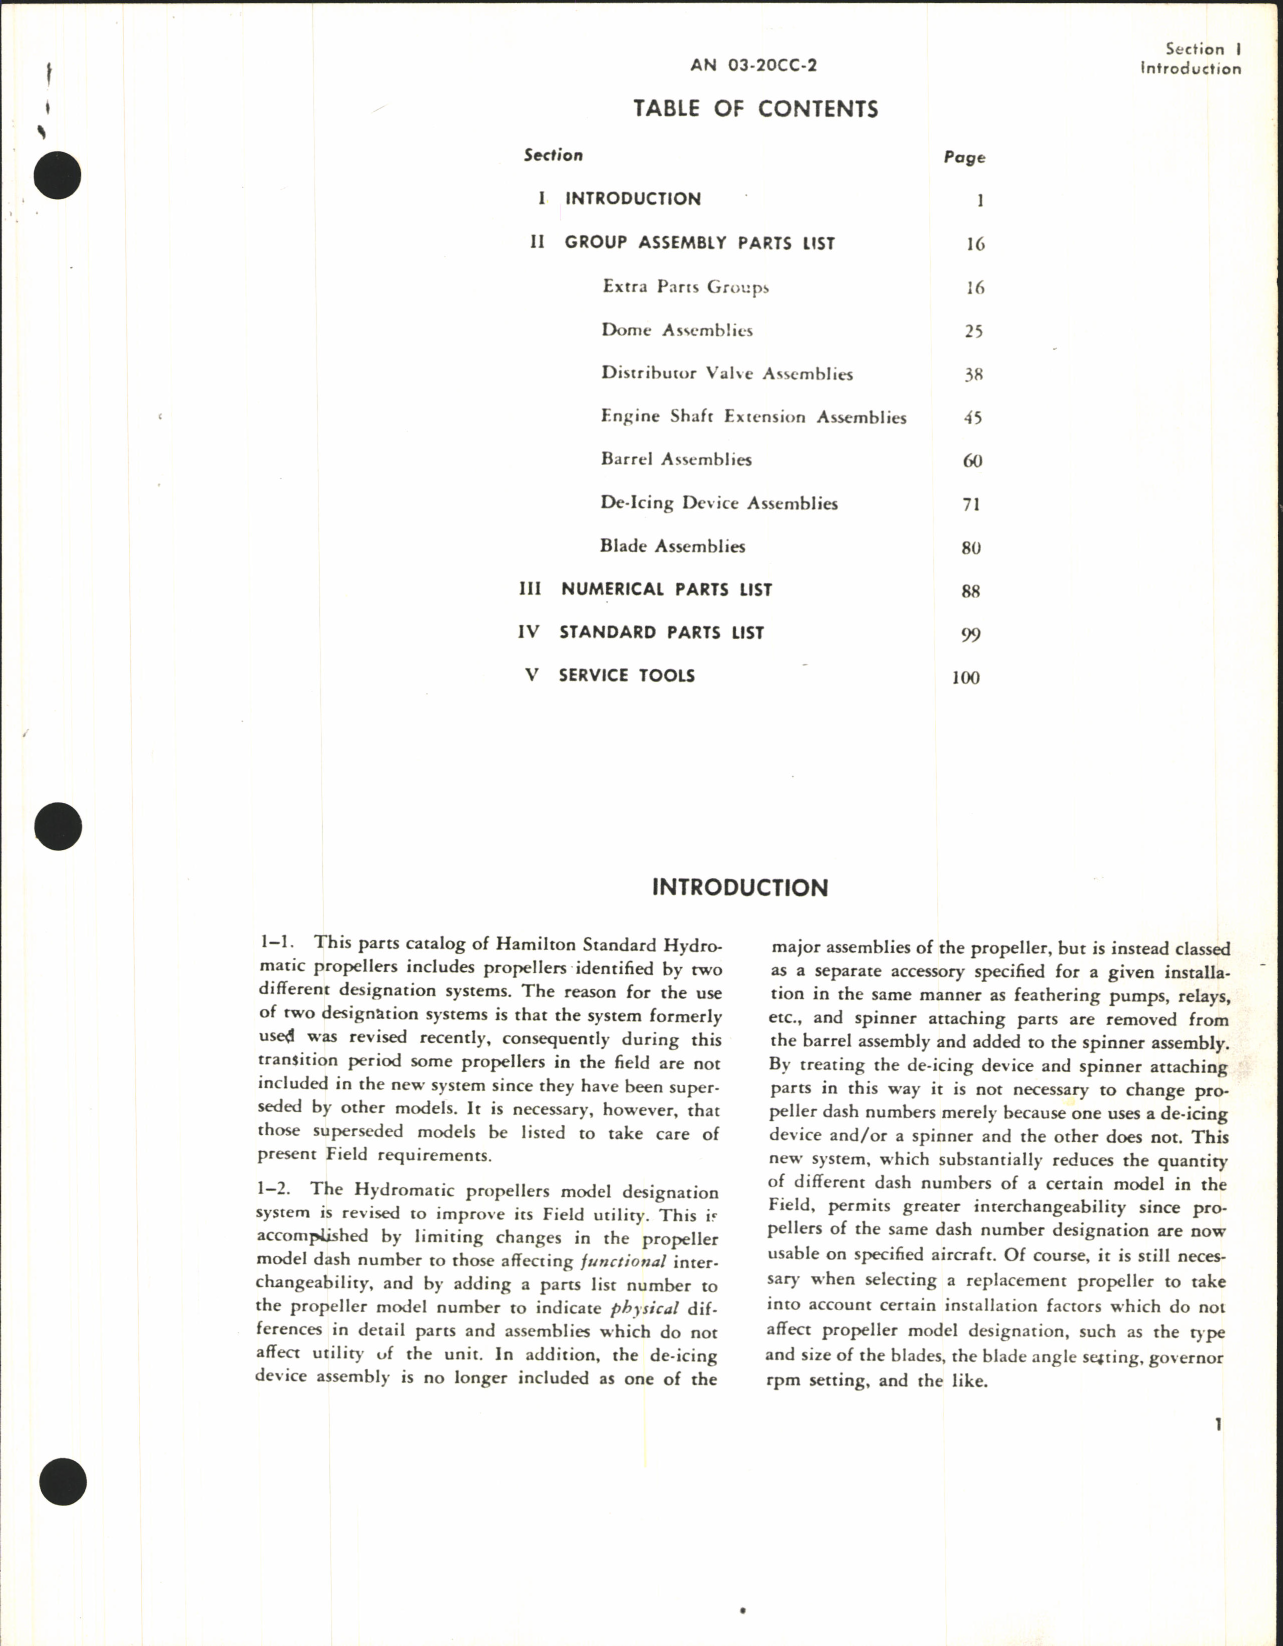 Sample page 5 from AirCorps Library document: Parts Catalog for Hydromatic Propellers